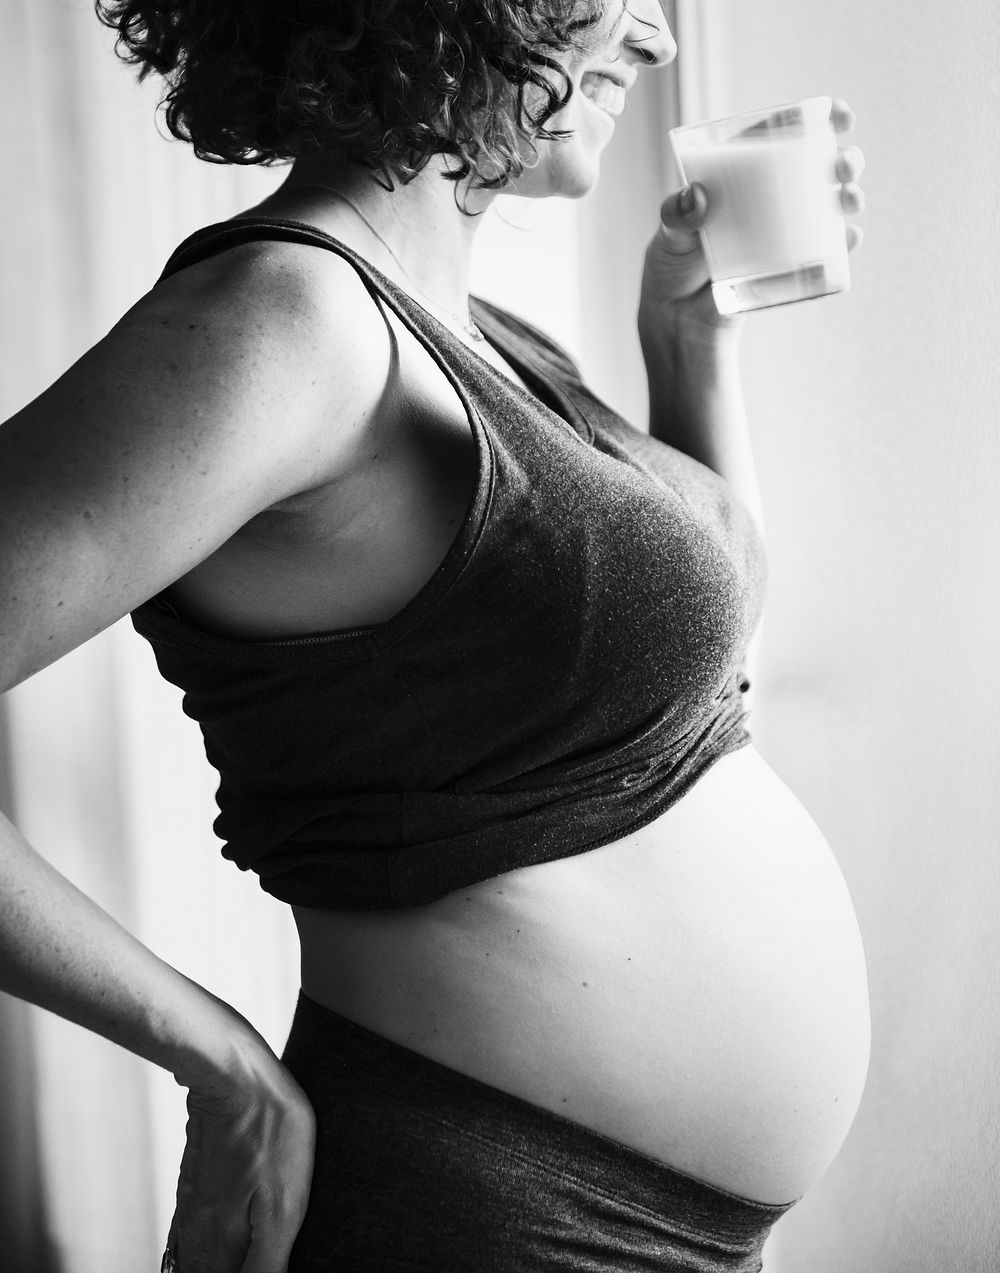 Pregnant woman drinking some milk